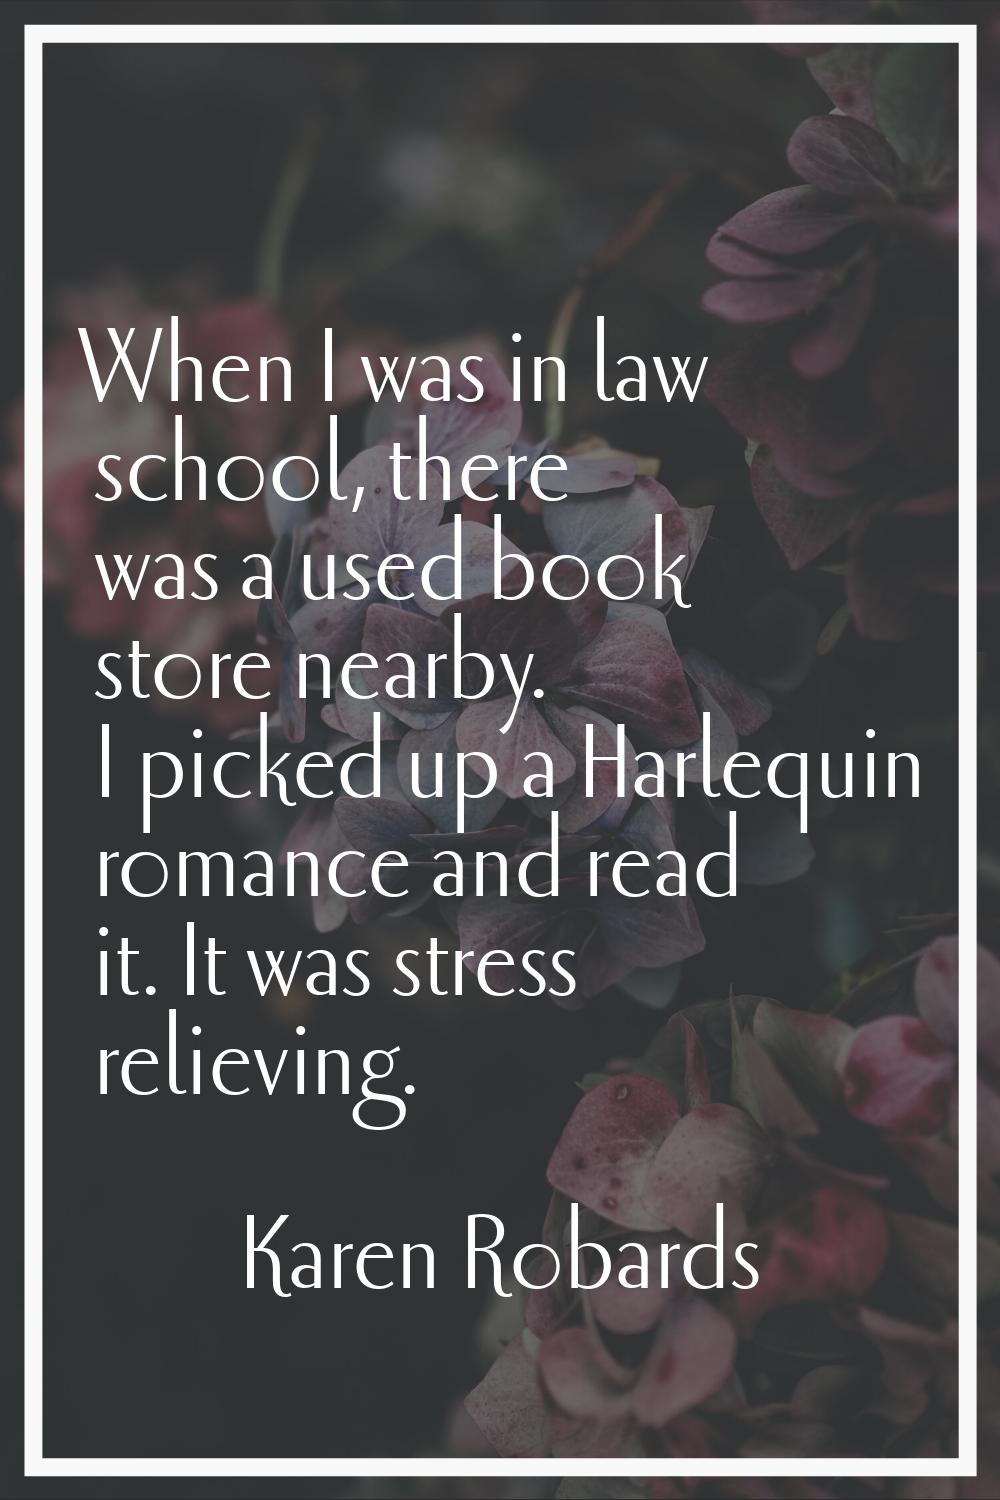 When I was in law school, there was a used book store nearby. I picked up a Harlequin romance and r